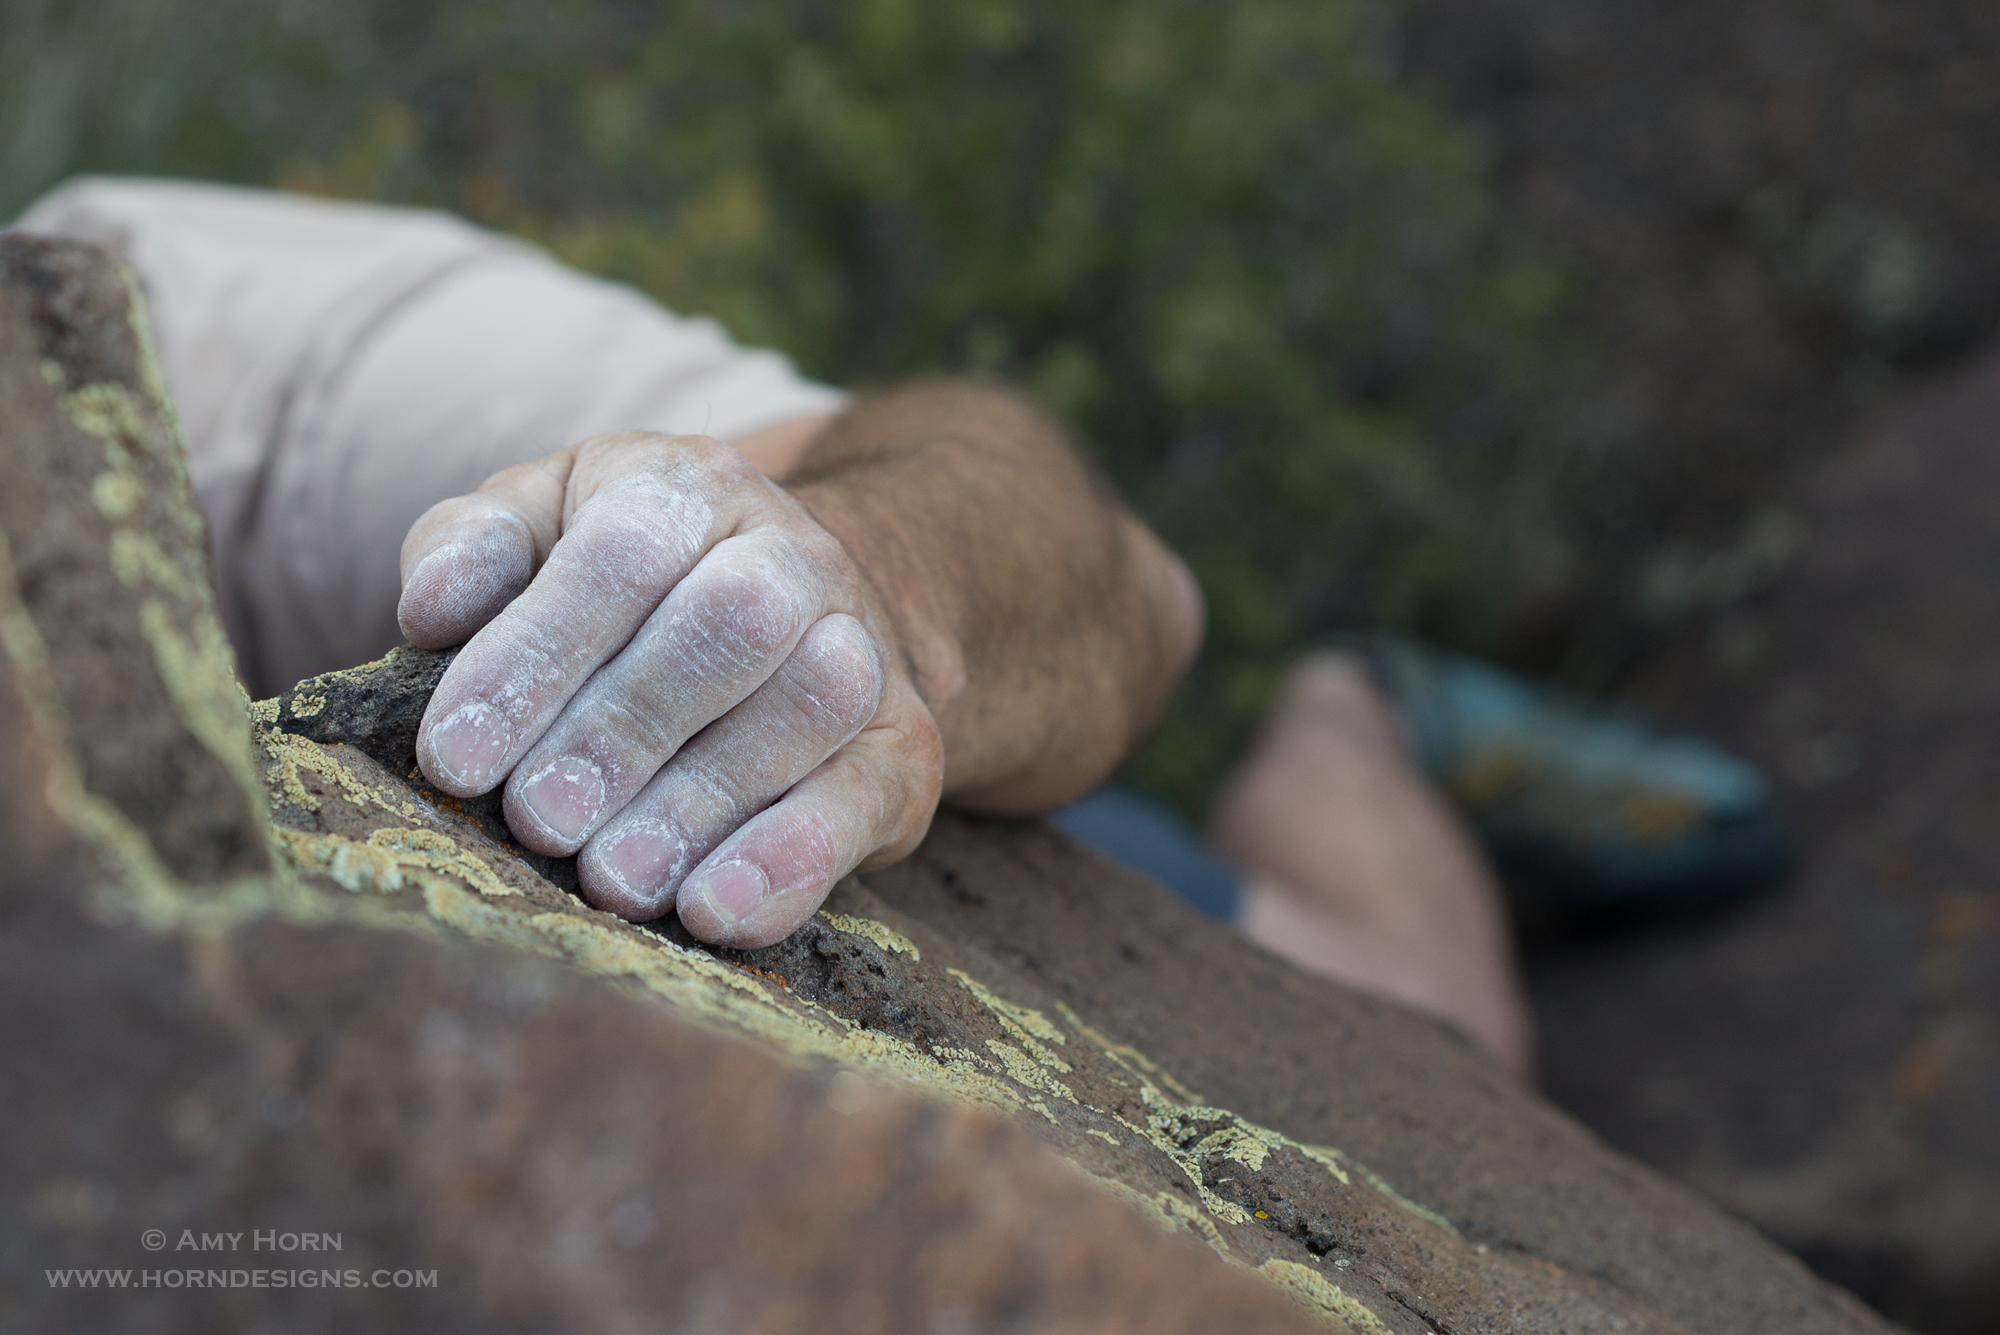 Chalked rock climbing hand from Buffalo Park by Amy Horn